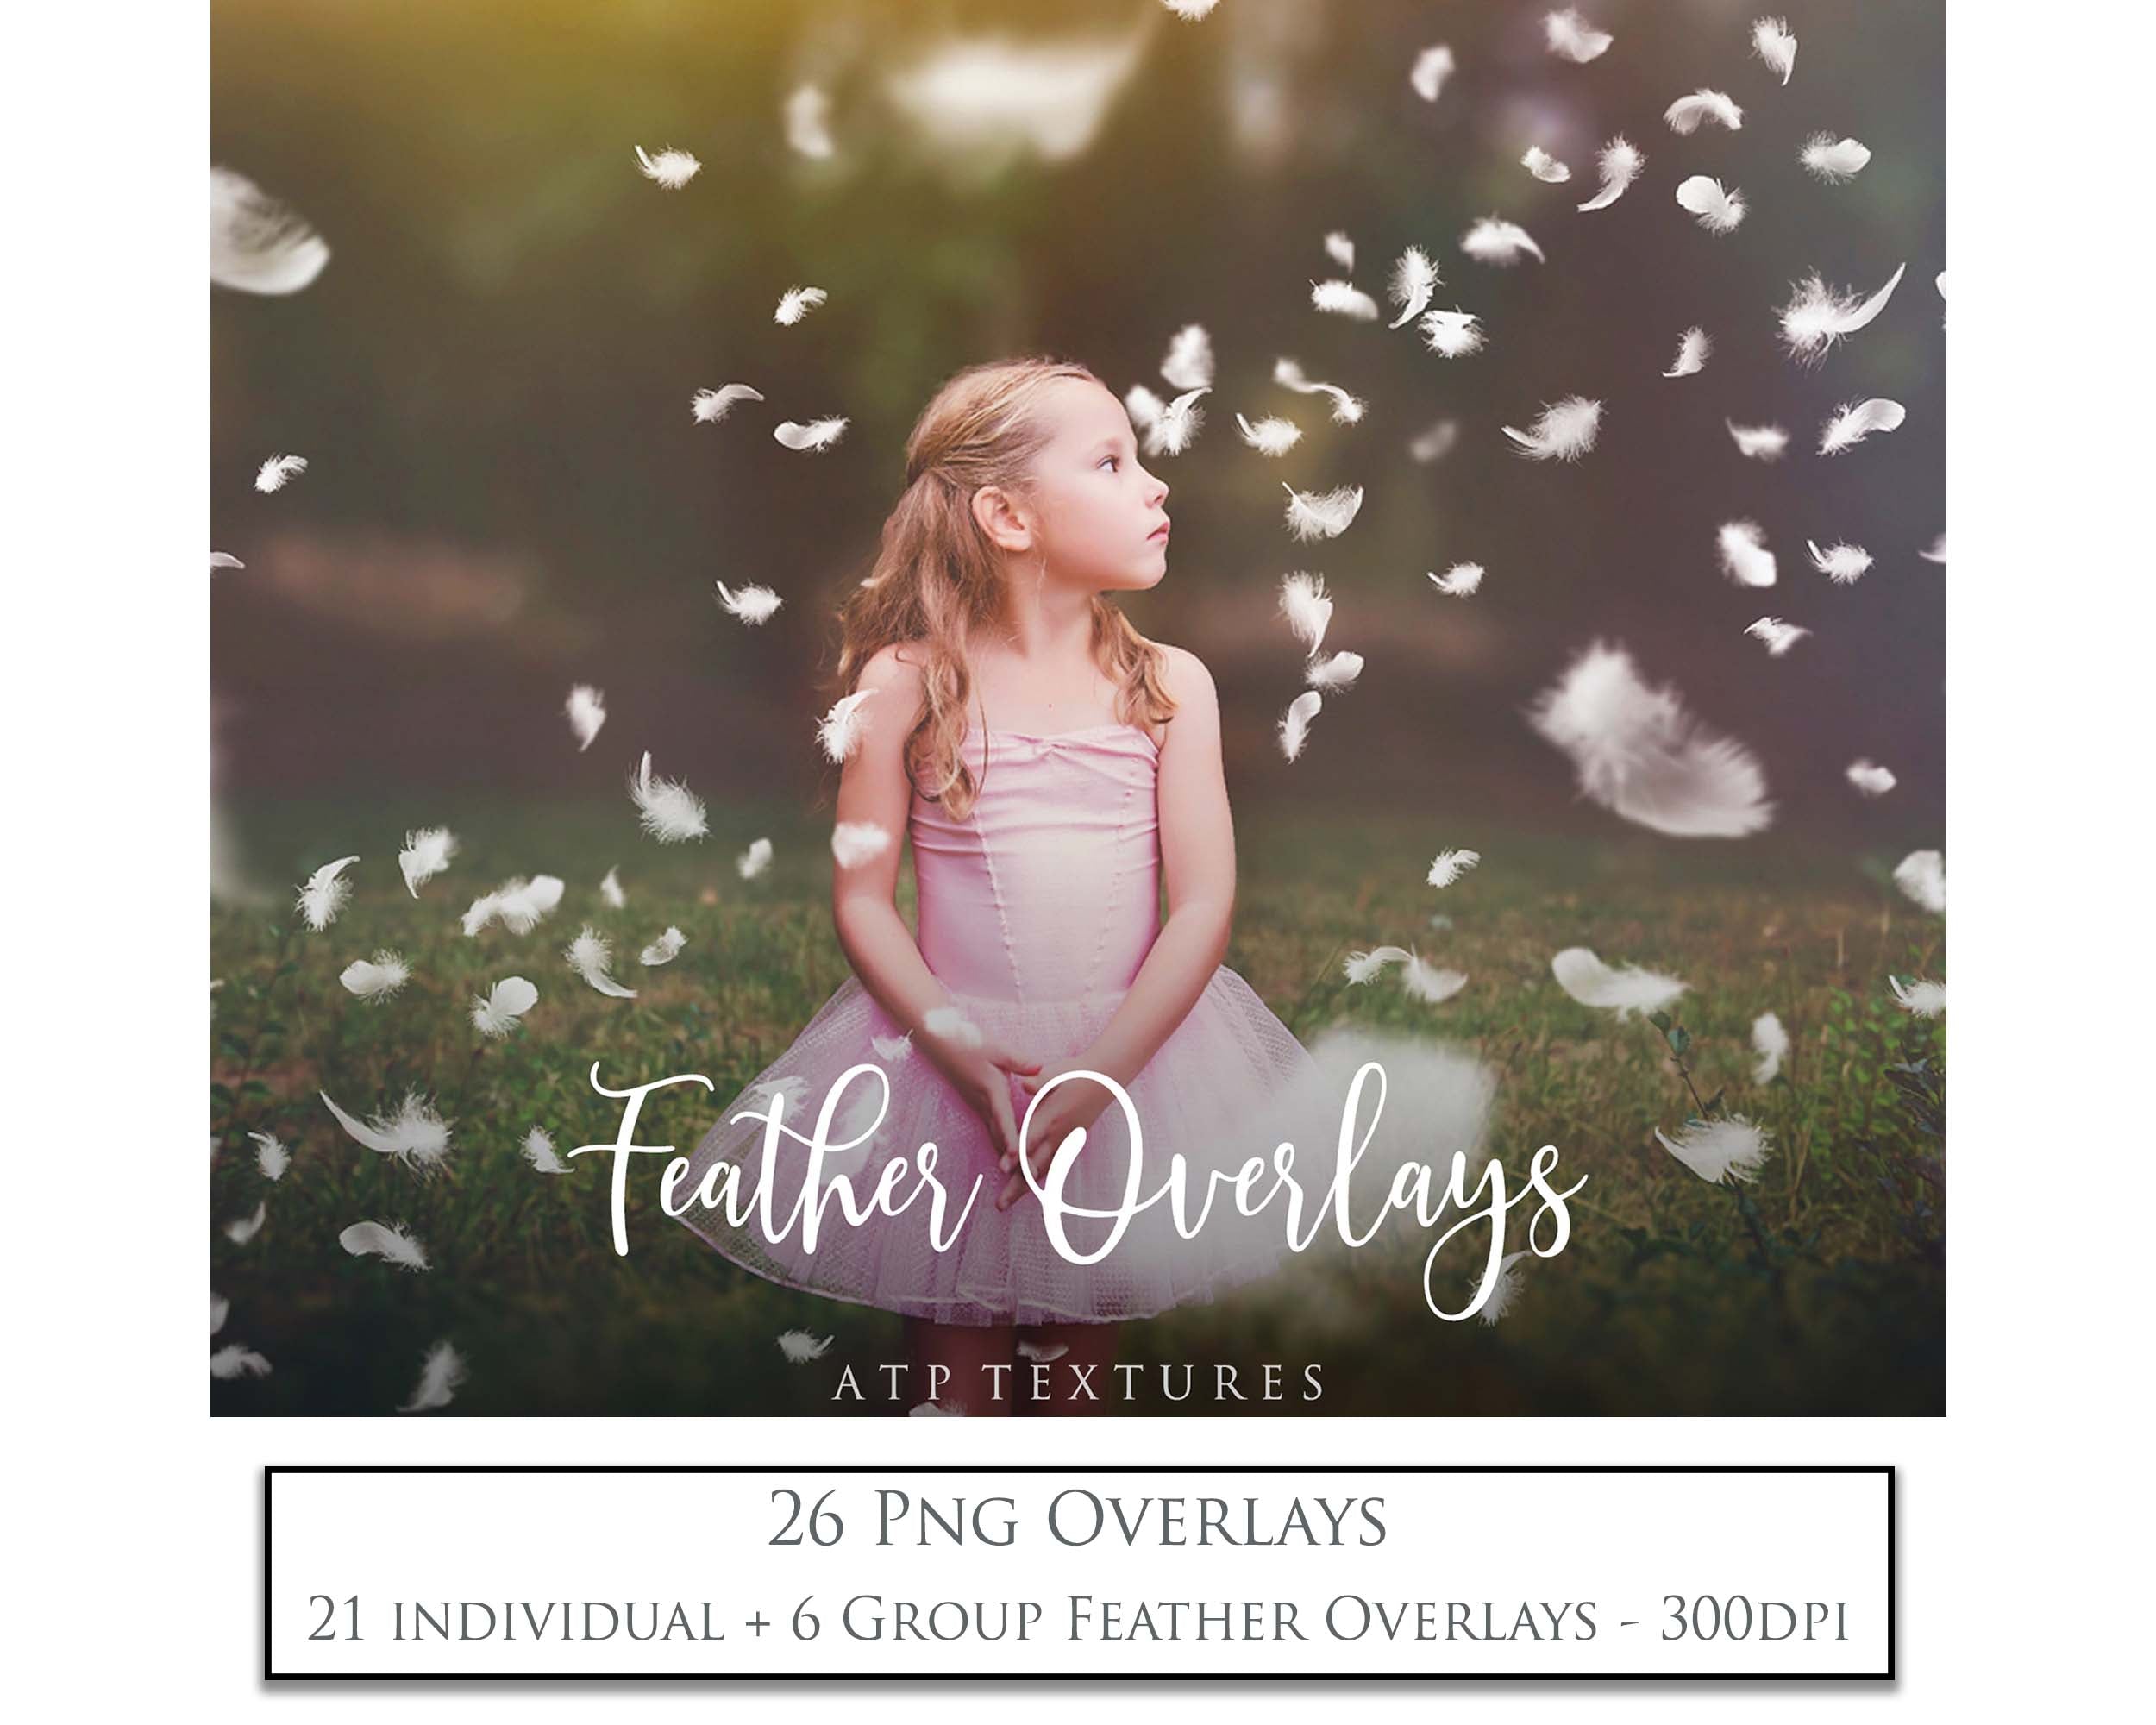 High Resolution Overlays for Photographers, Digital Art and Scrapbooking.Gorgeous clipart Feathers! Photoshop Photography. Fine art realistic. In high resolution, perfect for your next edit or project! Png graphic photography assets. Sublimation art. ATP Textures